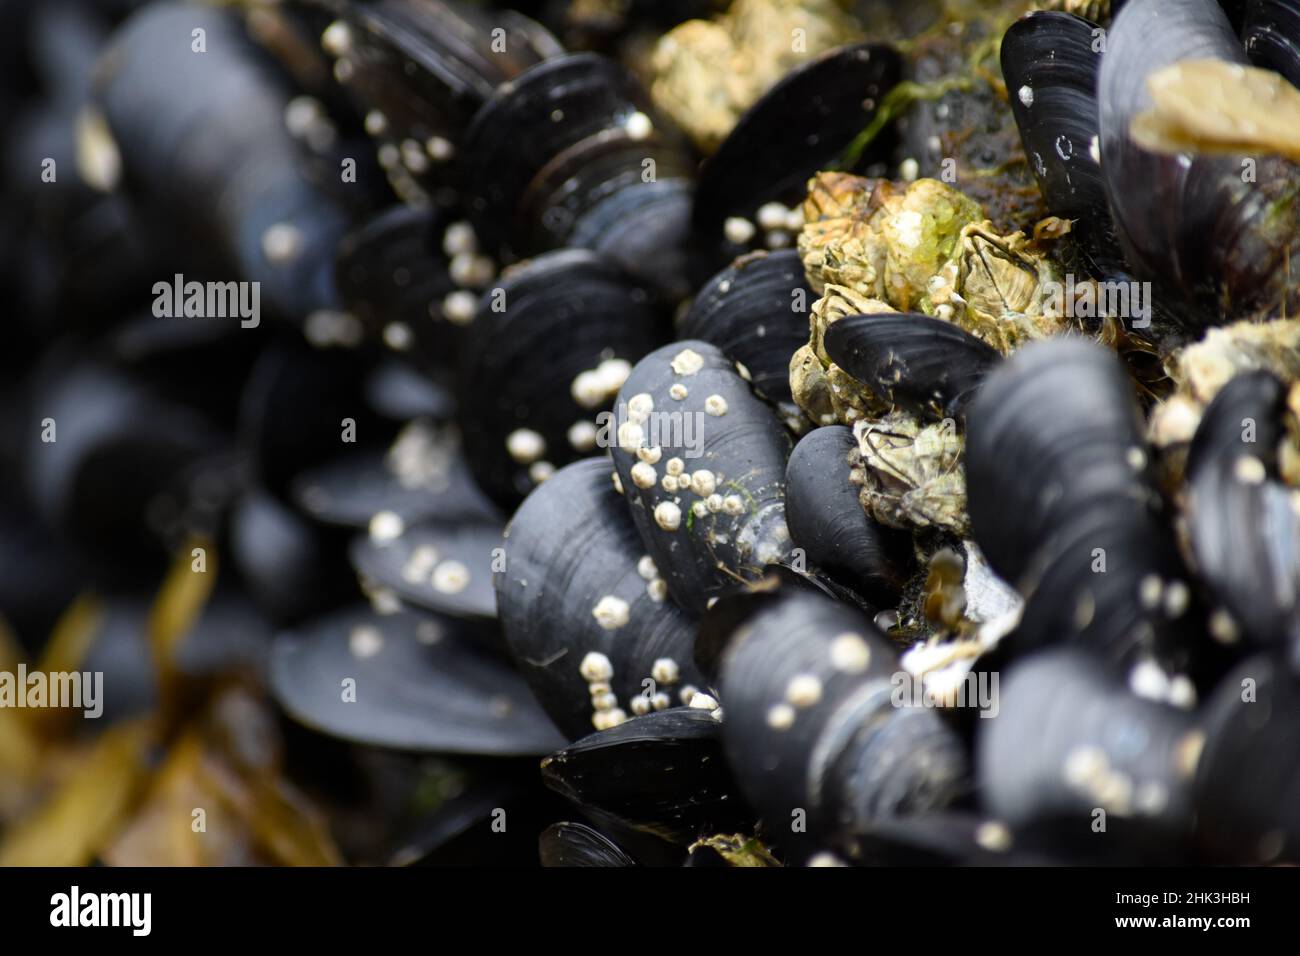 Alaska, Ketchikan, mussels on beach with barnacles. Stock Photo